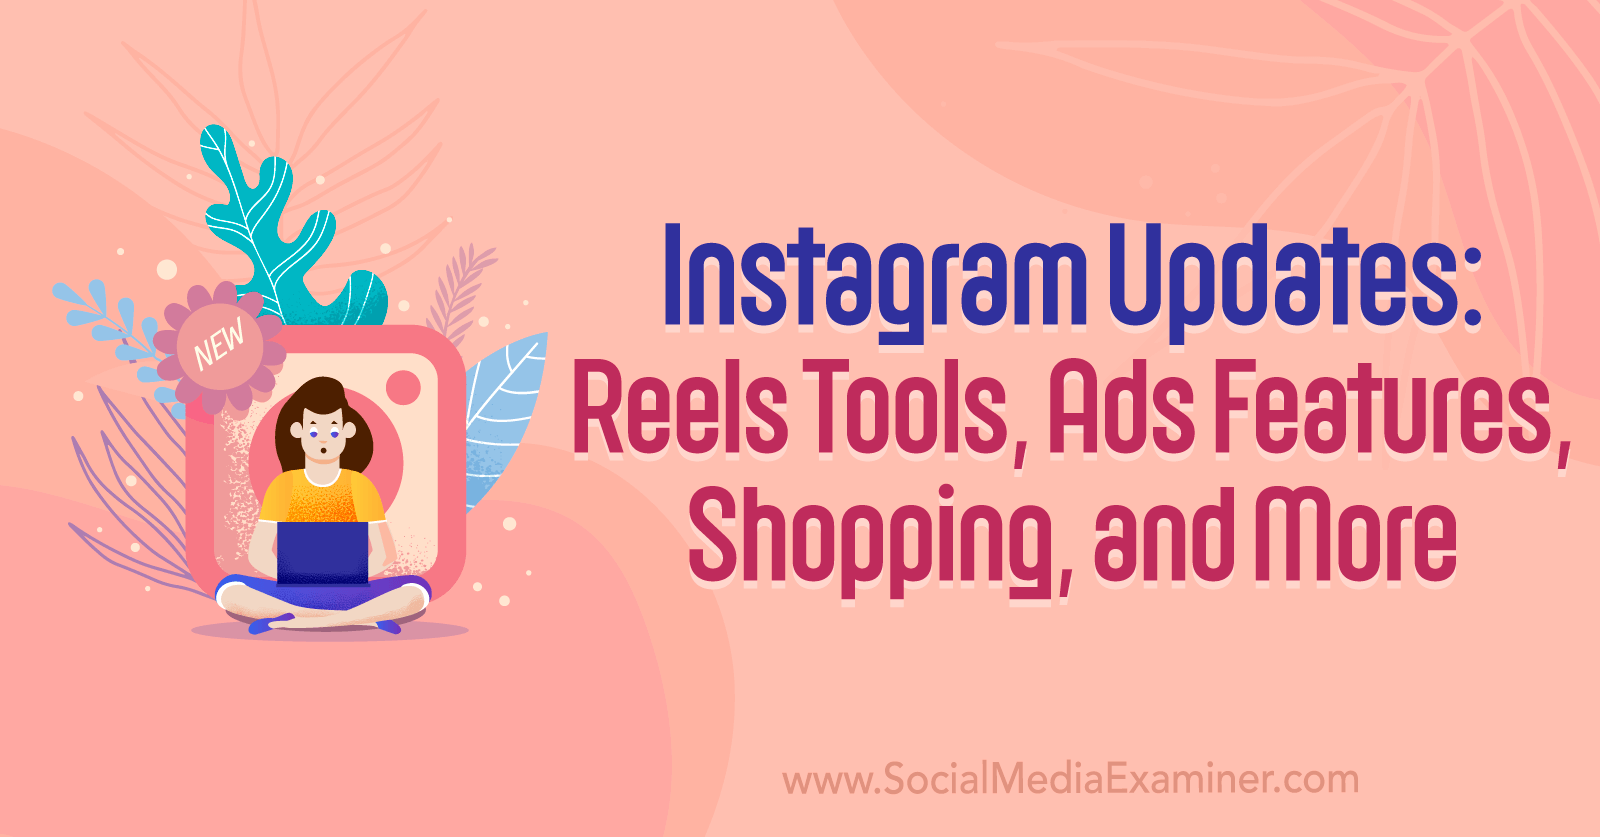 Instagram Updates: Reels Tools, Ads Features, Shopping, and More by Social Media Examiner